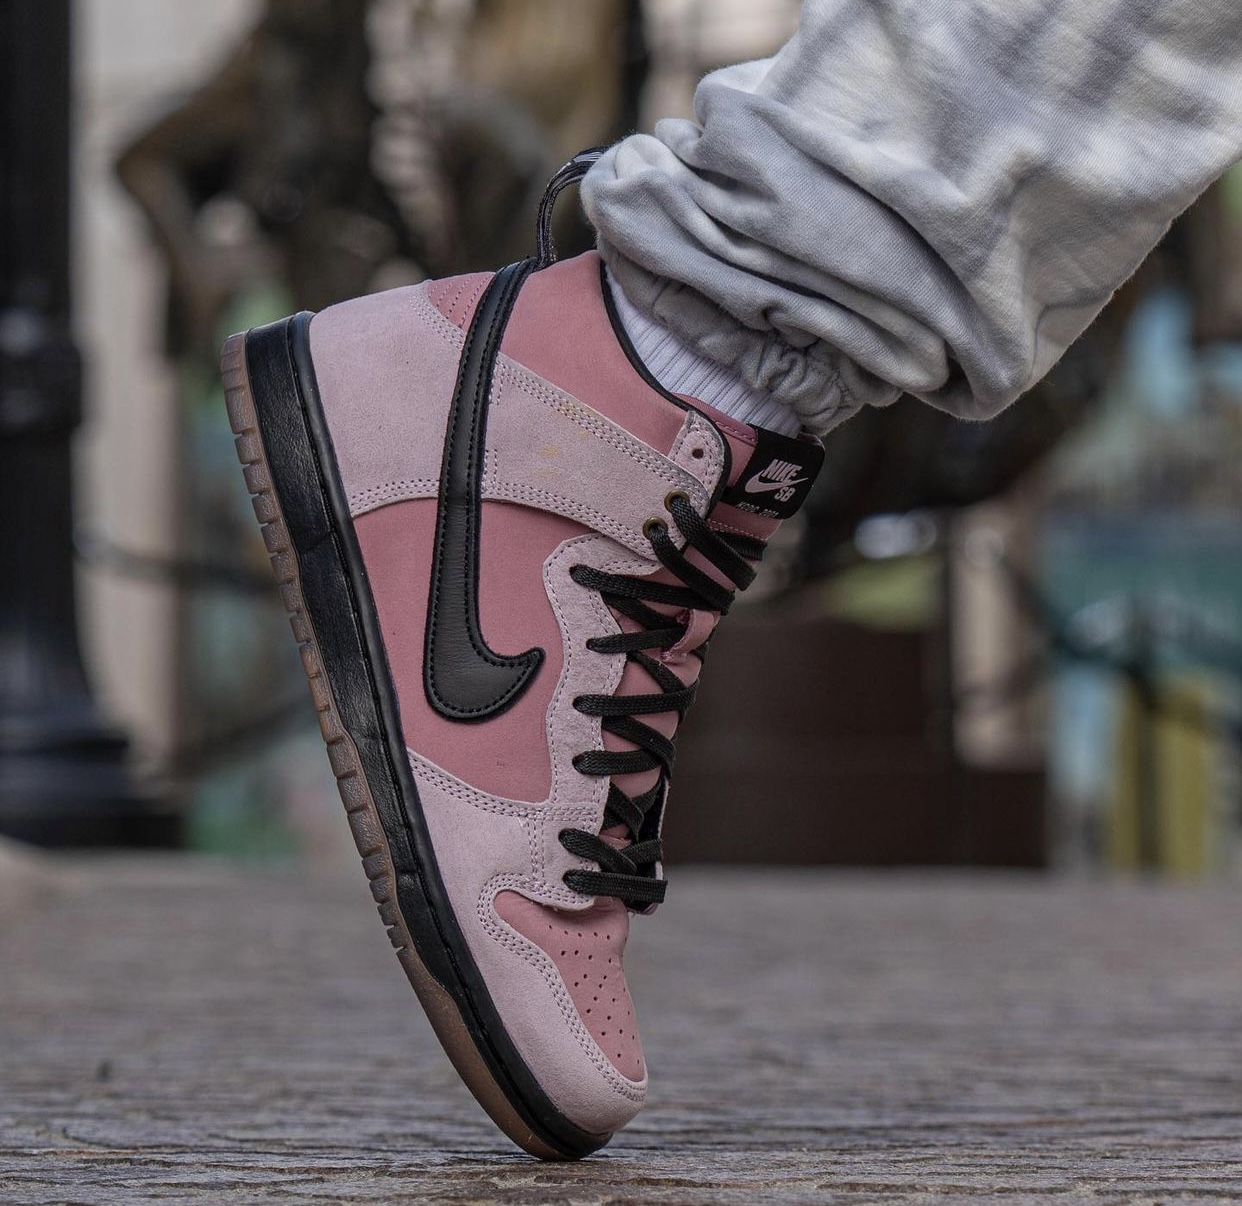 KCDC Nike SB Dunk High DH7742 600 Release Date On Feet